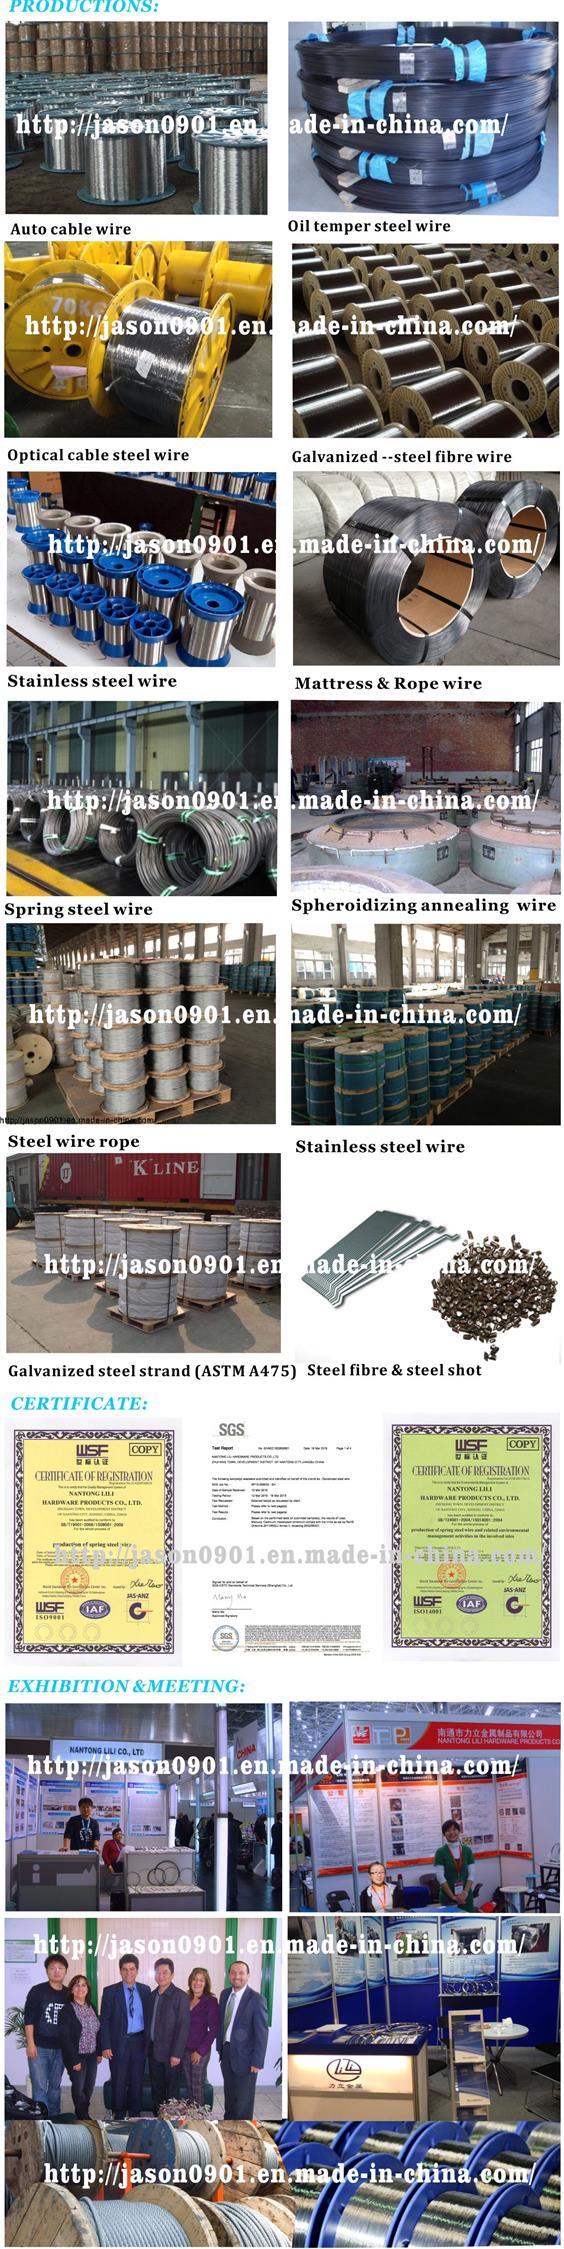 Elevator Steel Wire Ropes, Wire, Wire Rope, Steel Wire Rope, Steel Rope, Stainless Steel Rope